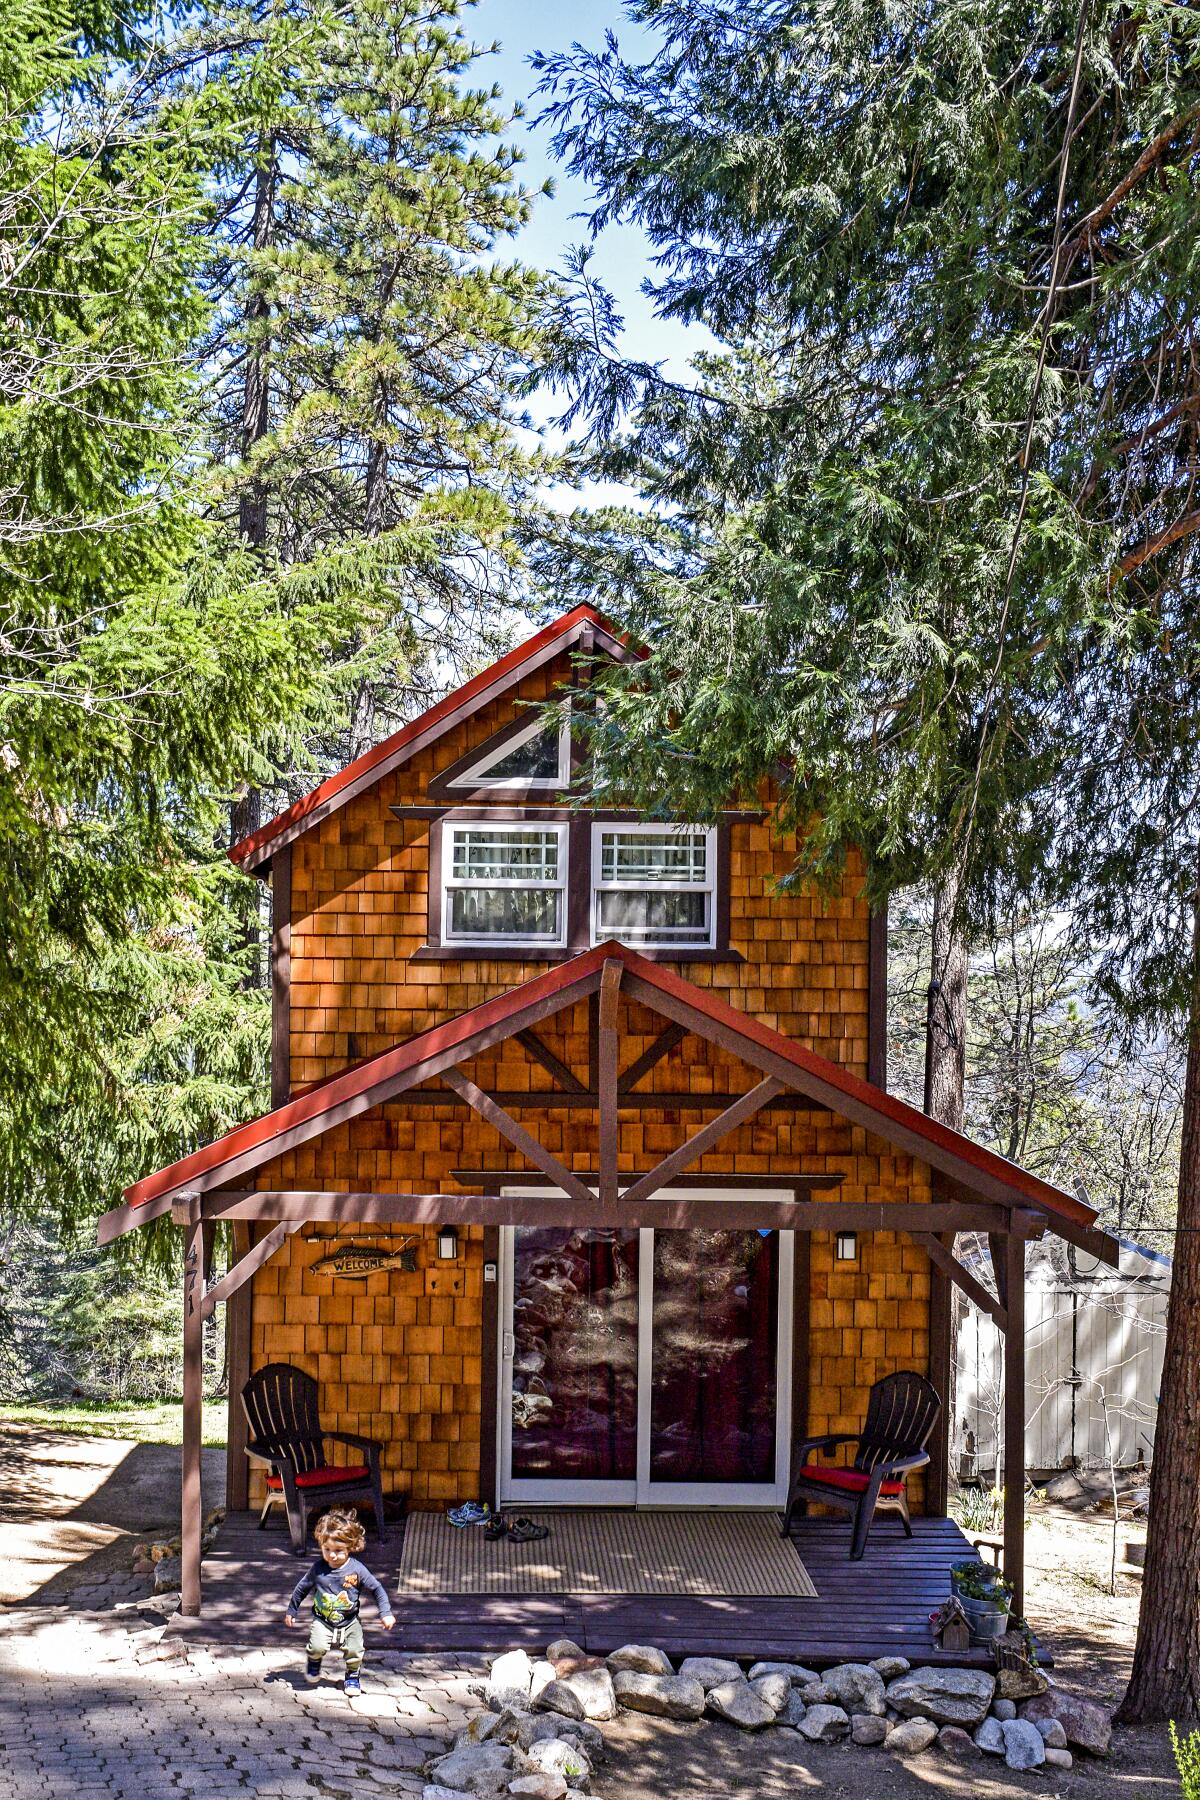 A small two-story wood house surrounded by conifers